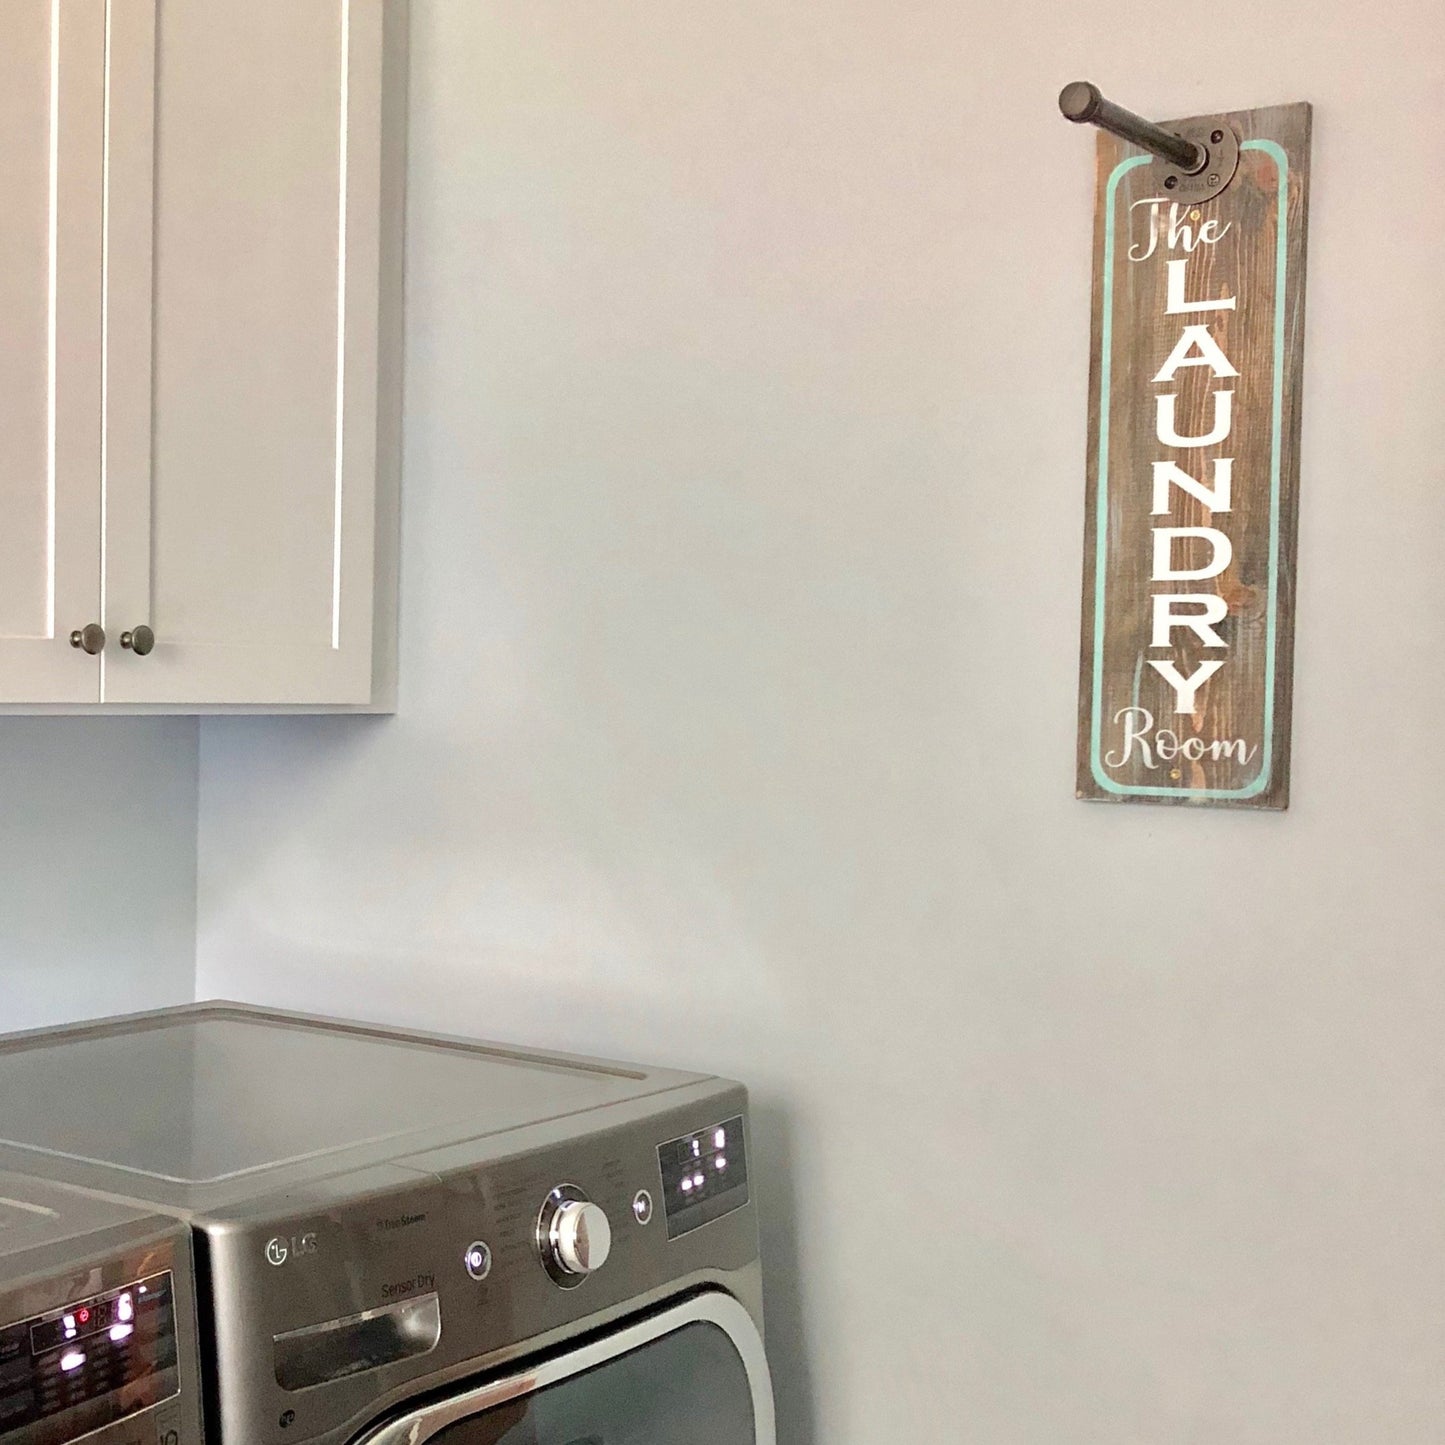 THE LAUNDRY ROOM Vertical: Laundry Clothes Hanger - Paisley Grace Makery